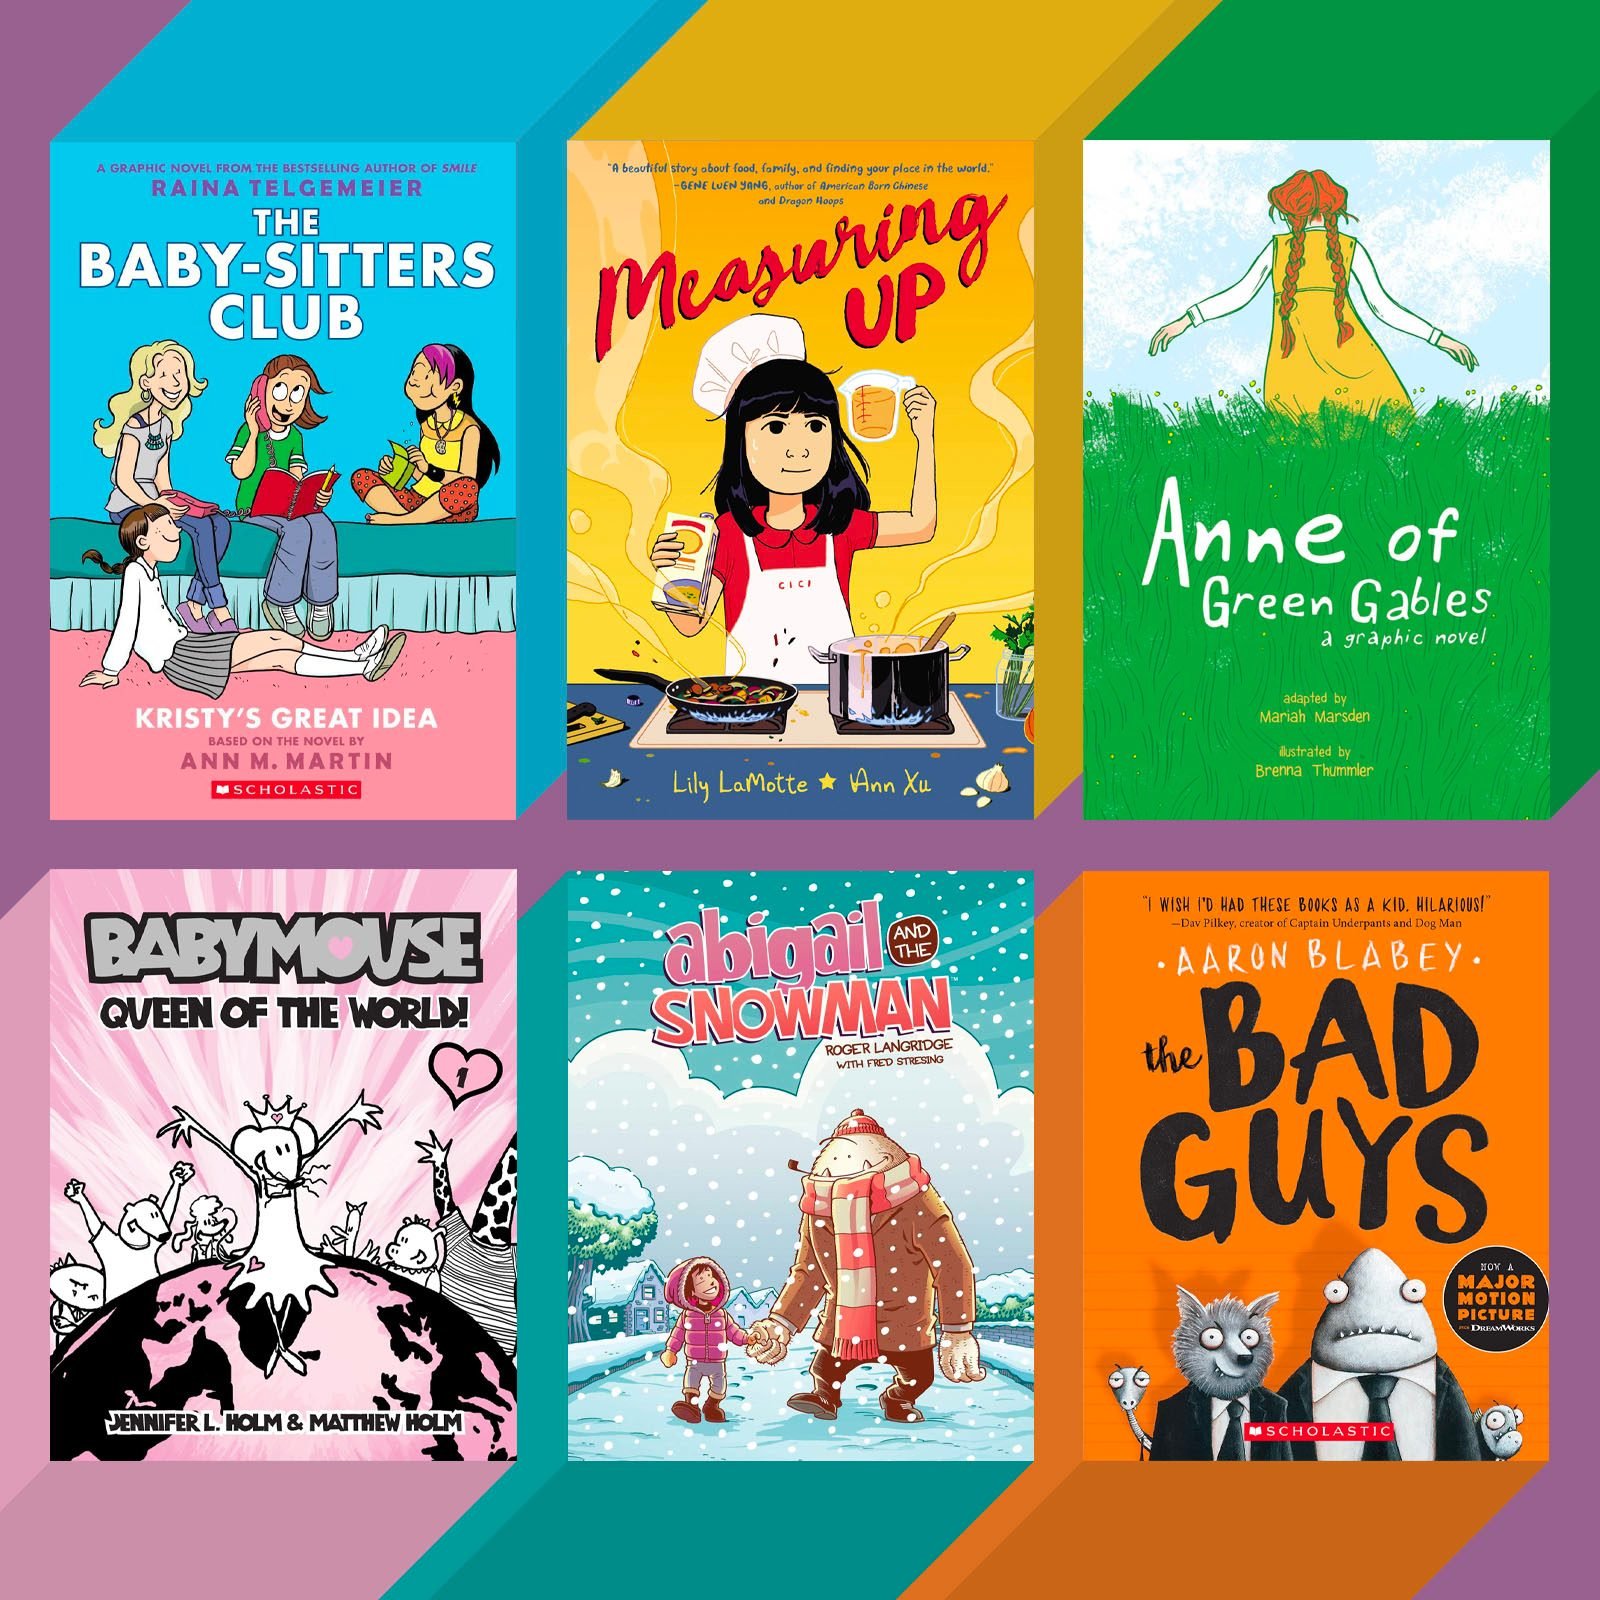 35 Graphic Novels for Kids to Read in 2022 | Best Graphic Novels for Kids